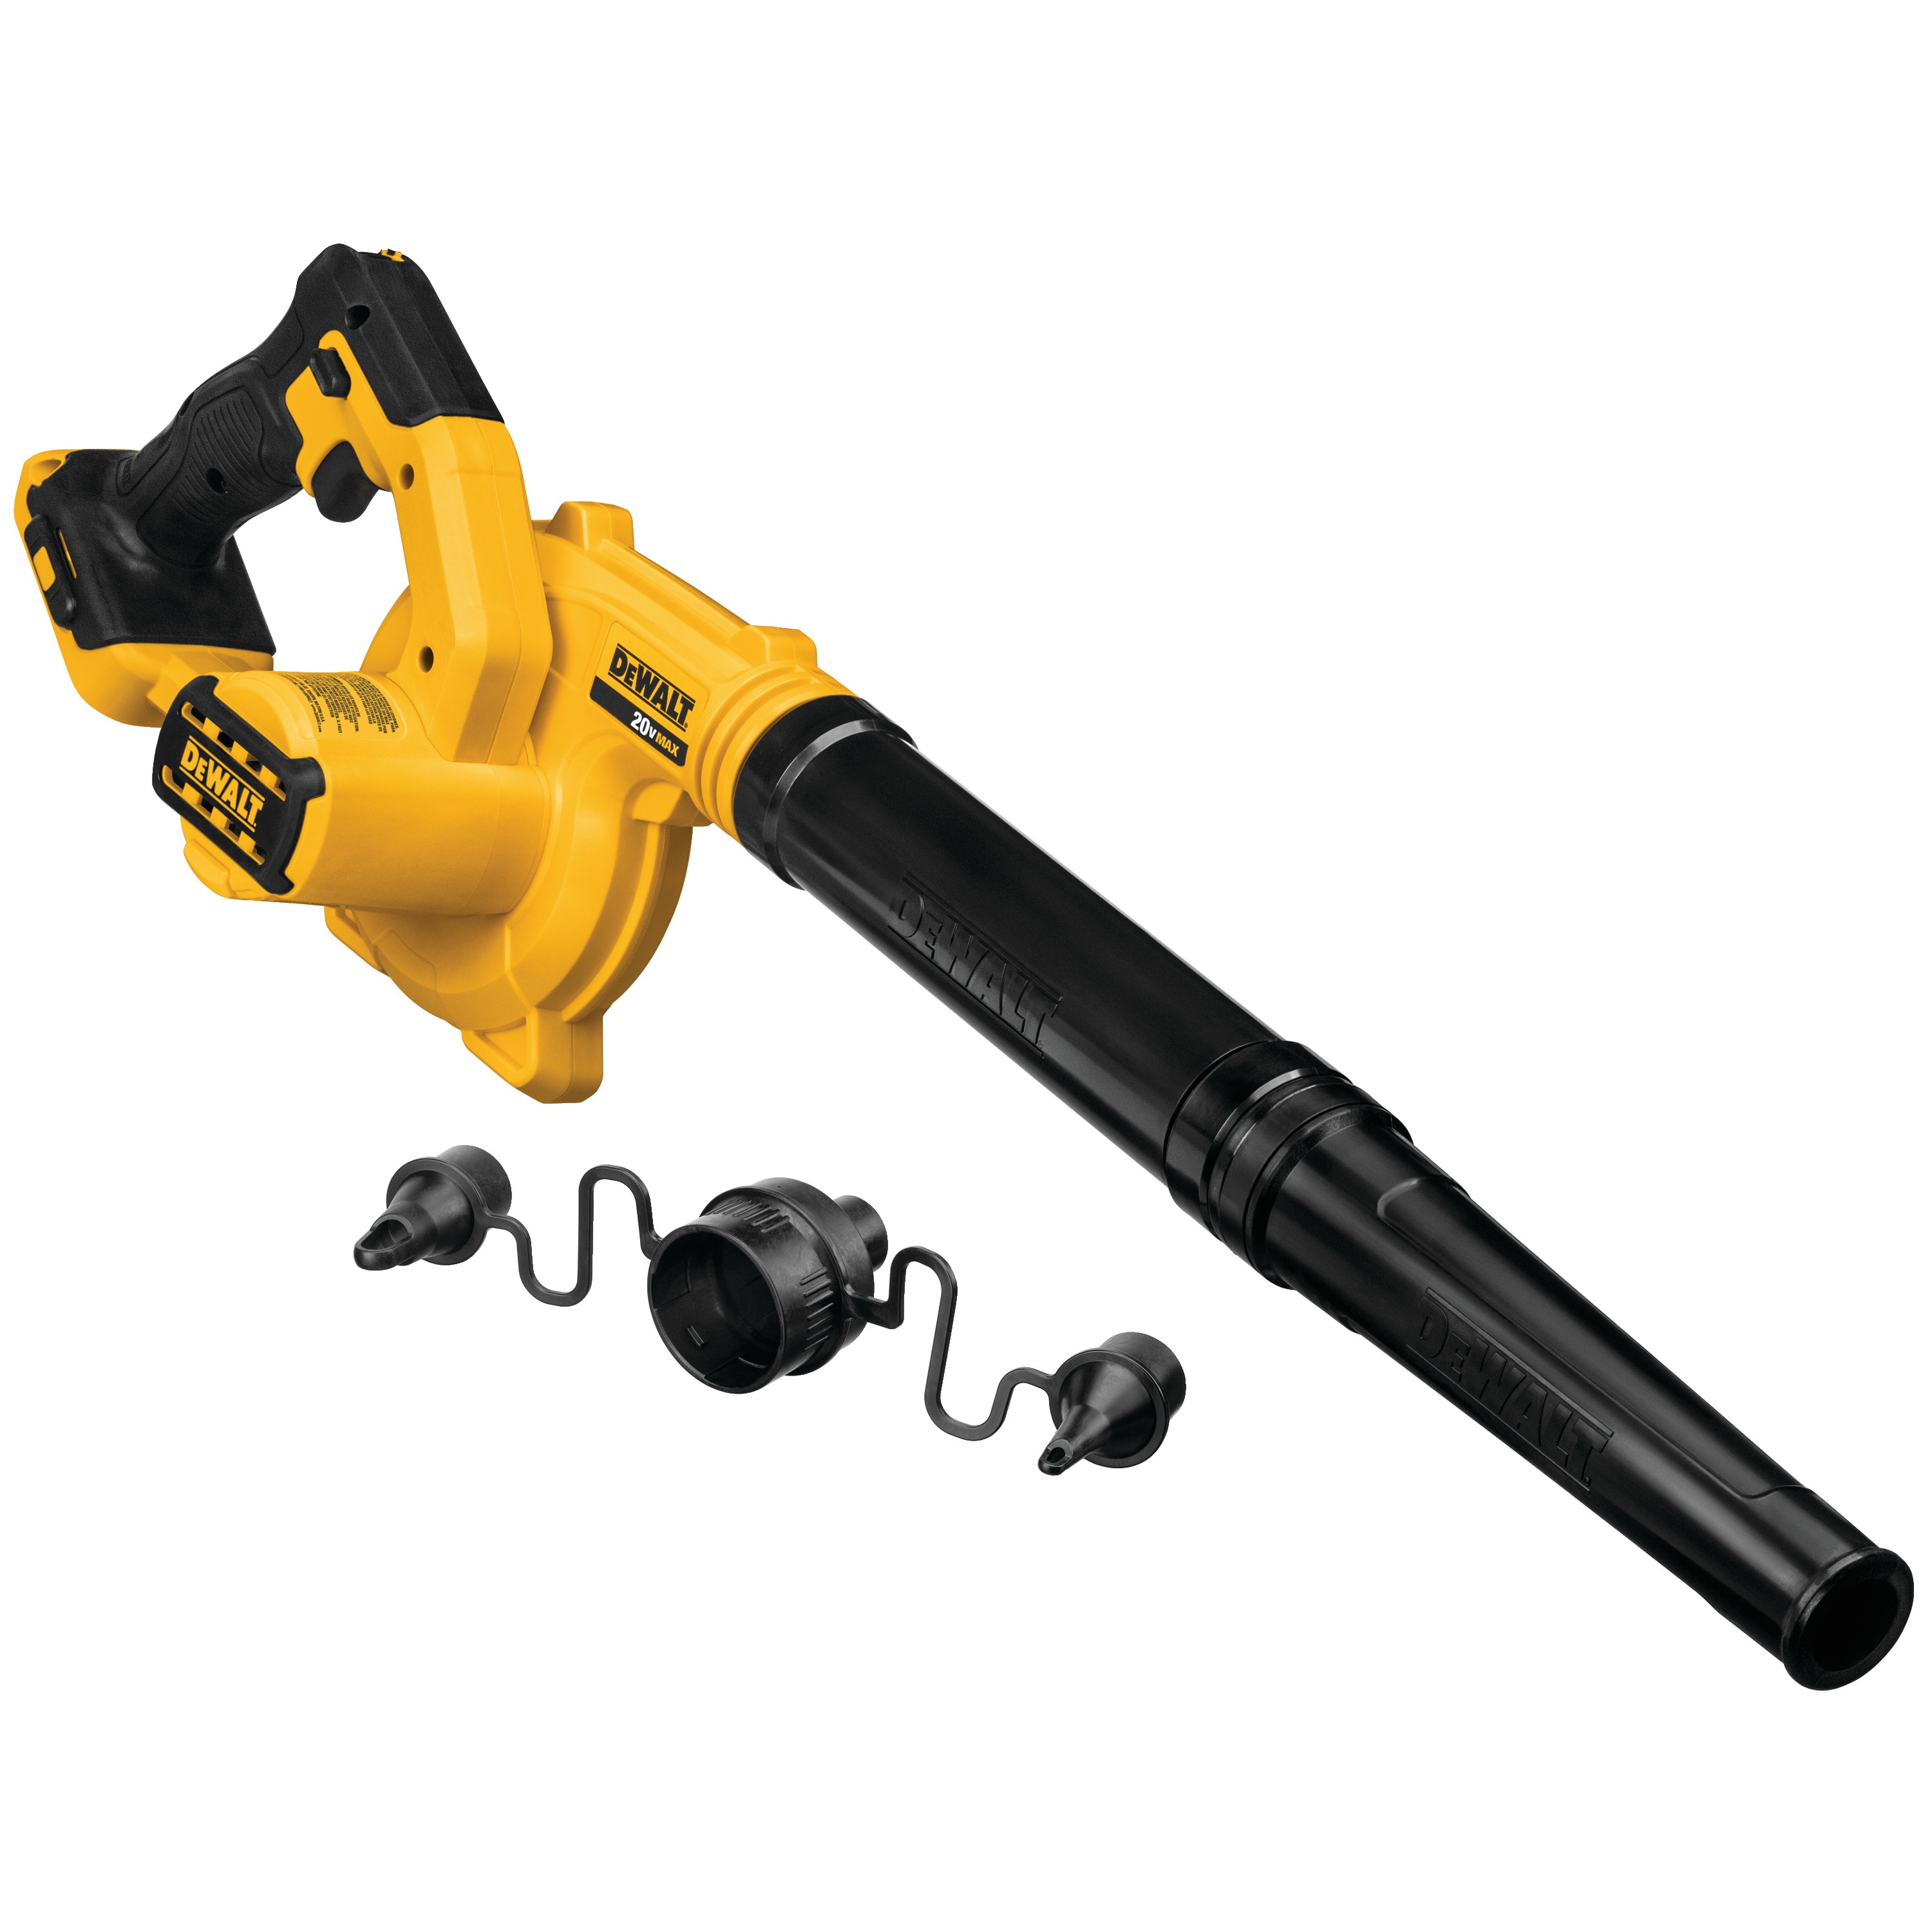 DEWALT - 20V MAX Compact Jobsite Blower TOOL ONLY - DCE100B